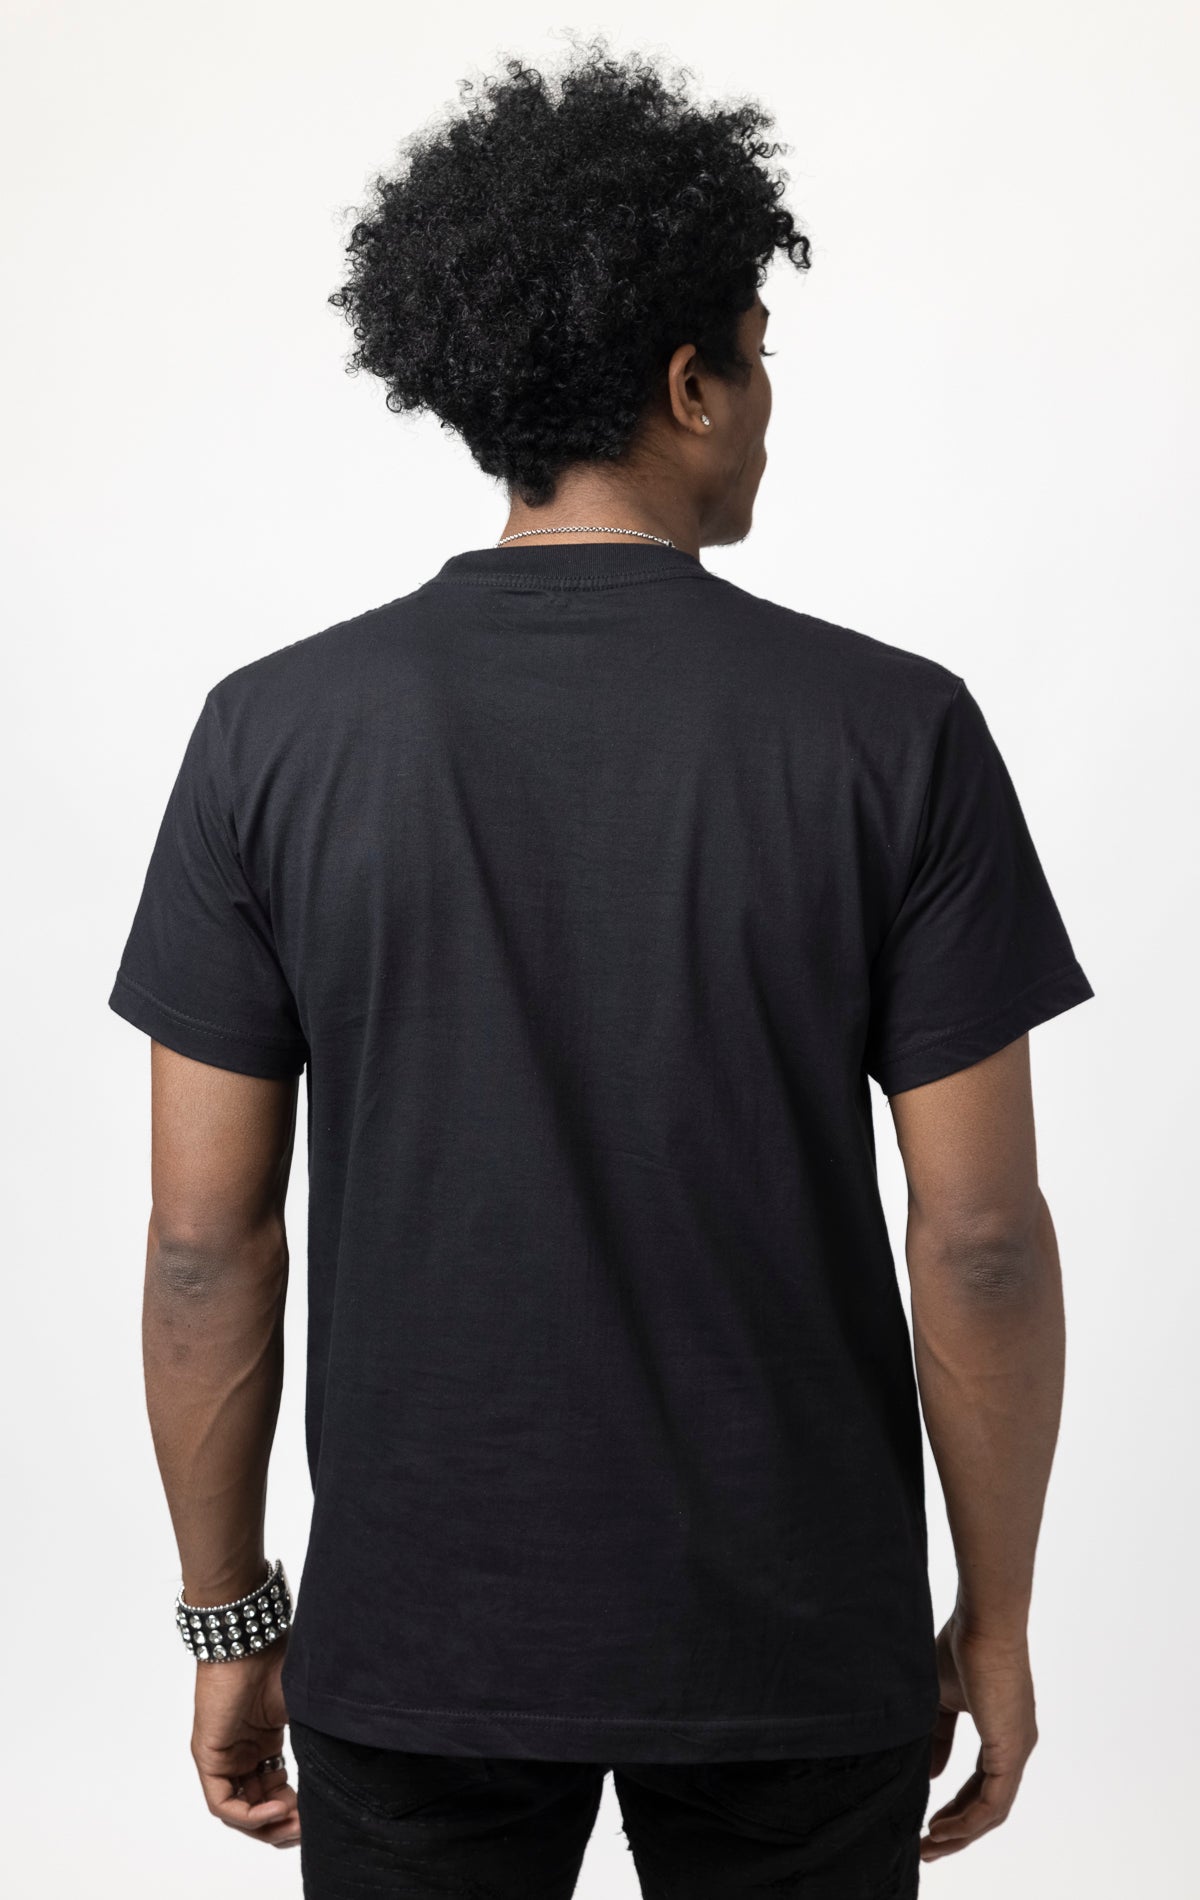 Black Today was a good day Oversized T-shirt with ribbed crew neck and a printed design on the front.